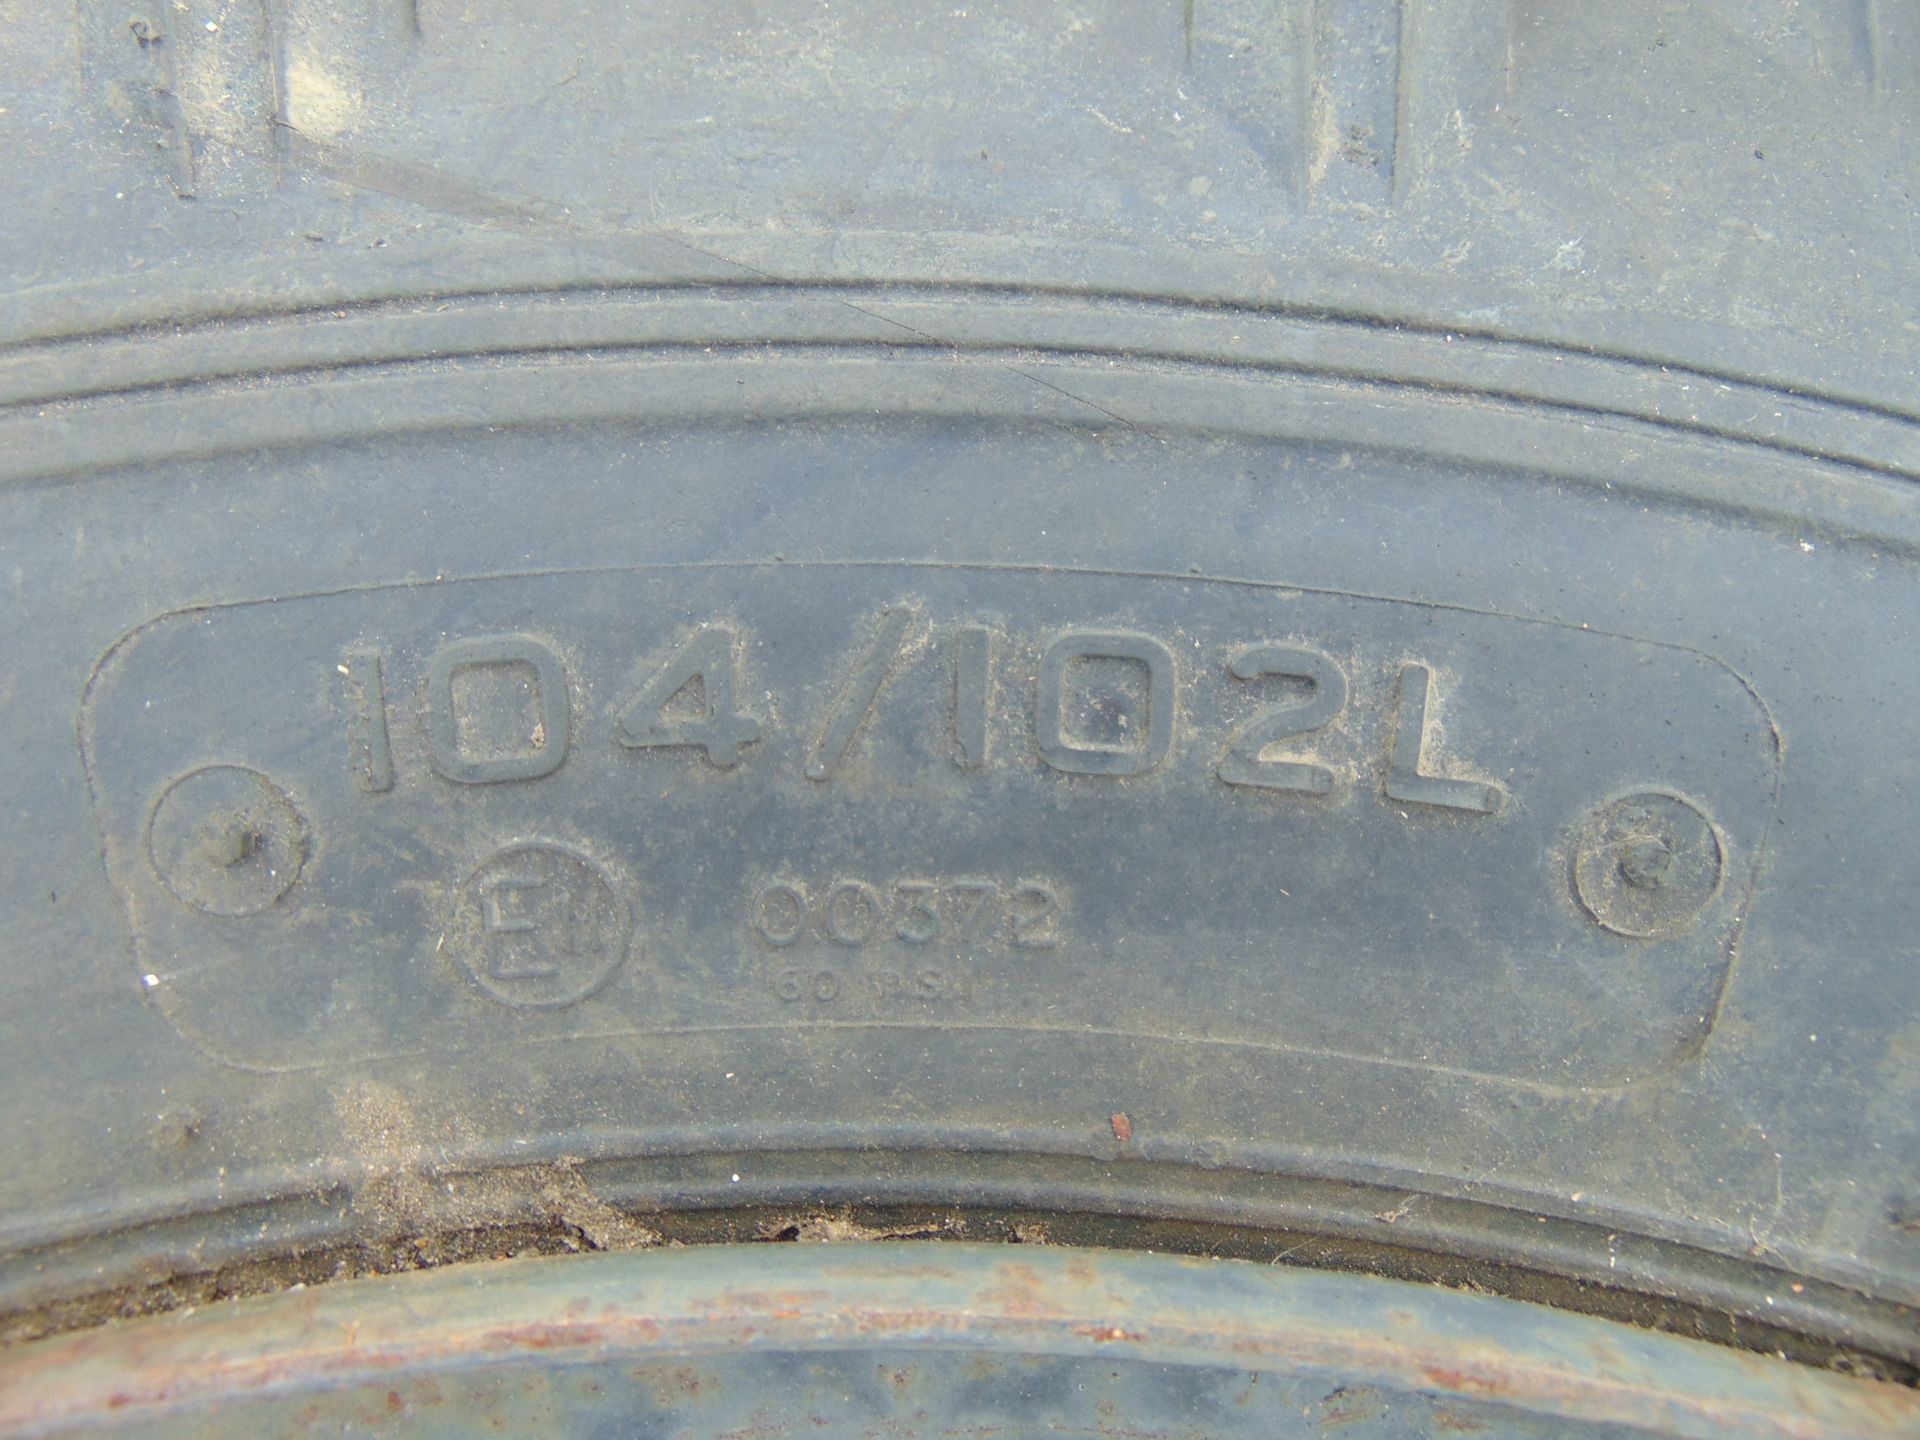 The Holy Grail of Tyres, 1 x Avon Traction Mileage 6.50 x 16 8 Ply Tyre complete with 5 stud rim - Bild 5 aus 6